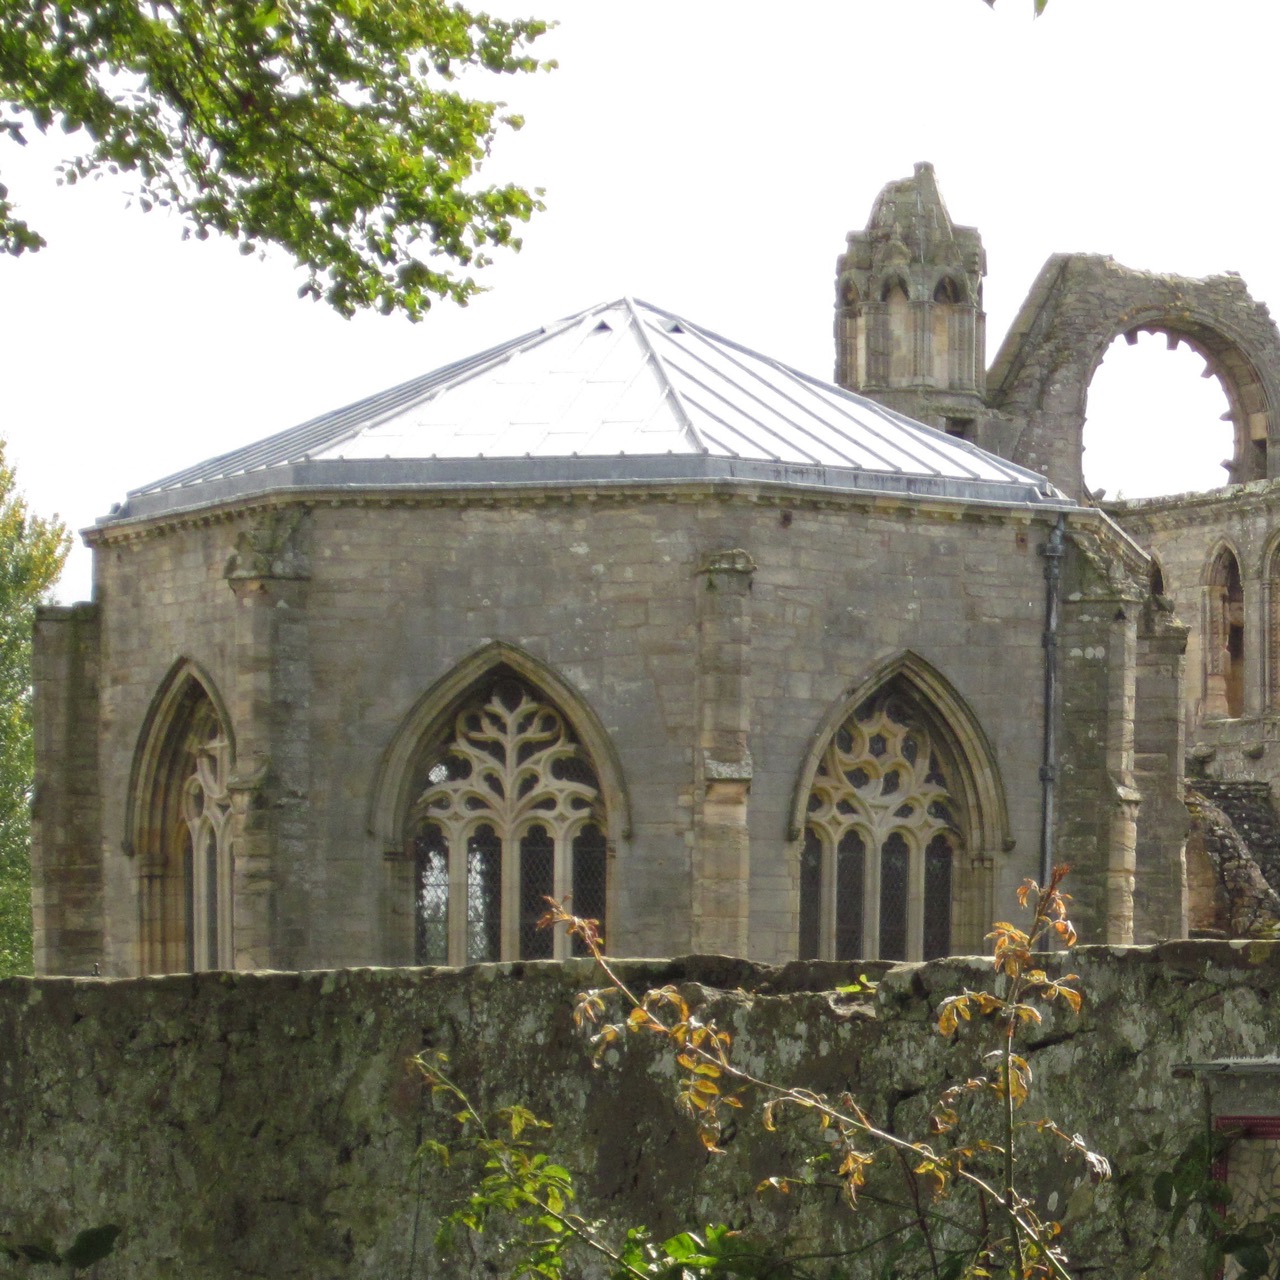 Exterior view of the chapter house